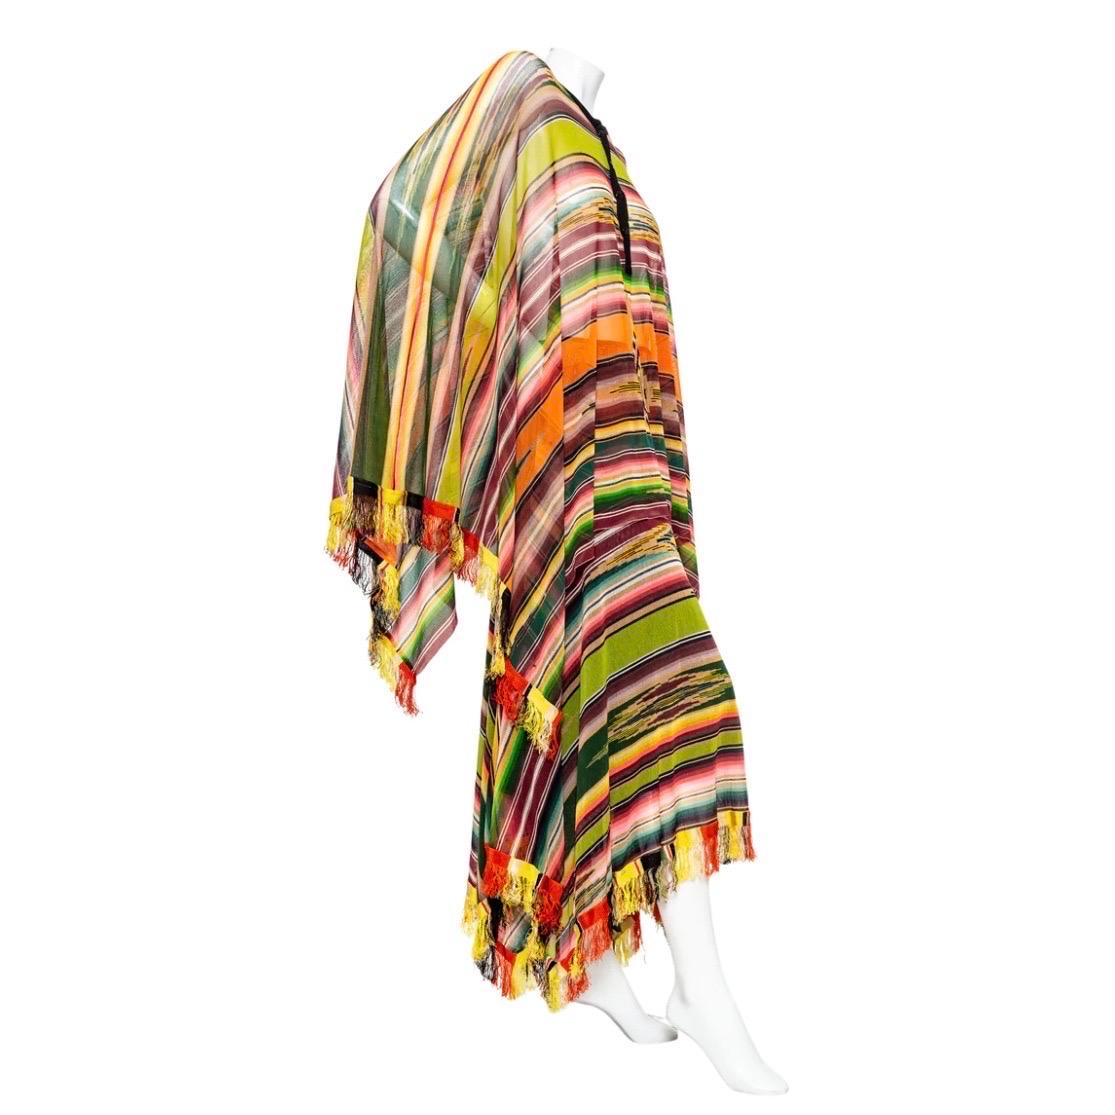 Jean Paul Gaultier Soleil Mesh Poncho and Skirt Set

Vintage
Multicolored; vibrant serape inspired pattern
Soleil label
Set includes poncho and skirt
Poncho features a black placket, fringe, and horizontal striping
Skirt features an elasticized pull